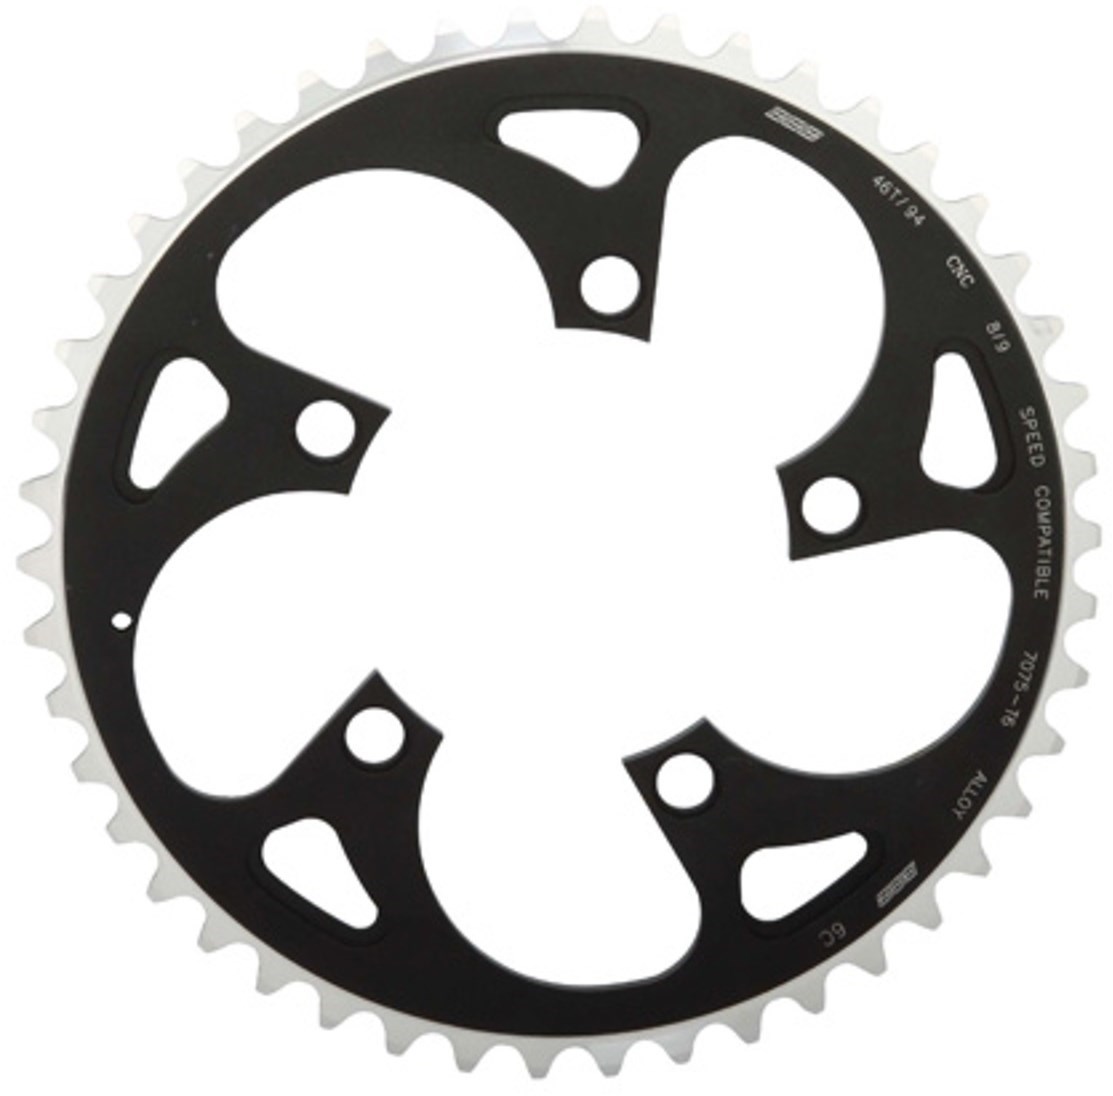 BBB RoundAbout 5 Chainring 94BCD product image